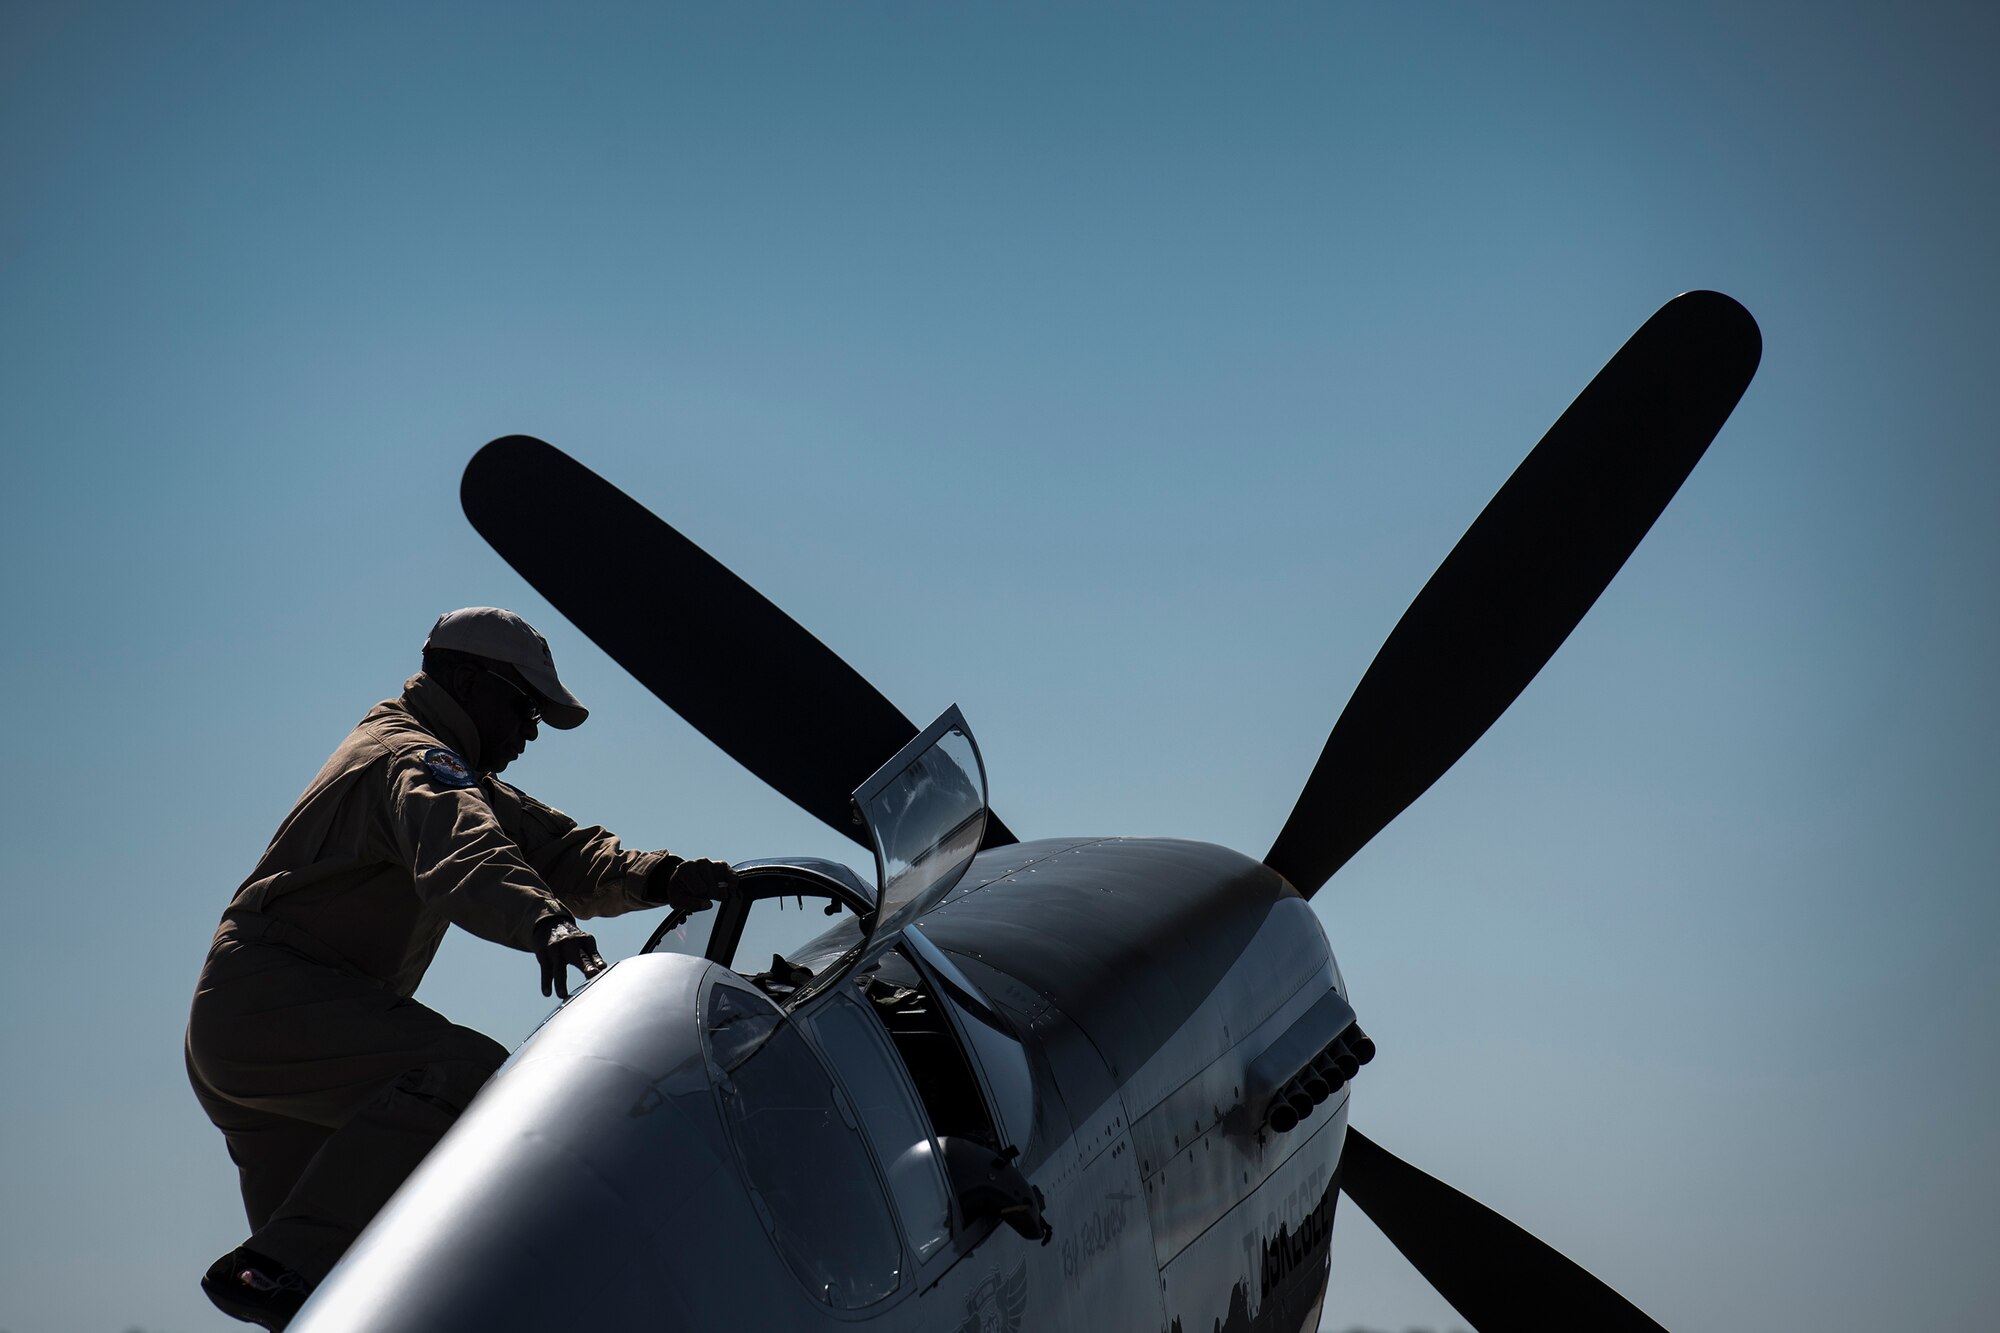 A performer climbs into a P-51 Mustang during the Thunder Over South Georgia Air Show, Oct. 29, 2017, at Moody Air Force Base, Ga. The open house is an opportunity for Moody to thank the local community for all its support, and exhibit air power and it included aerial performances, food, face painting and much more. (U.S. Air Force photo by Staff Sgt. Ryan Callaghan)